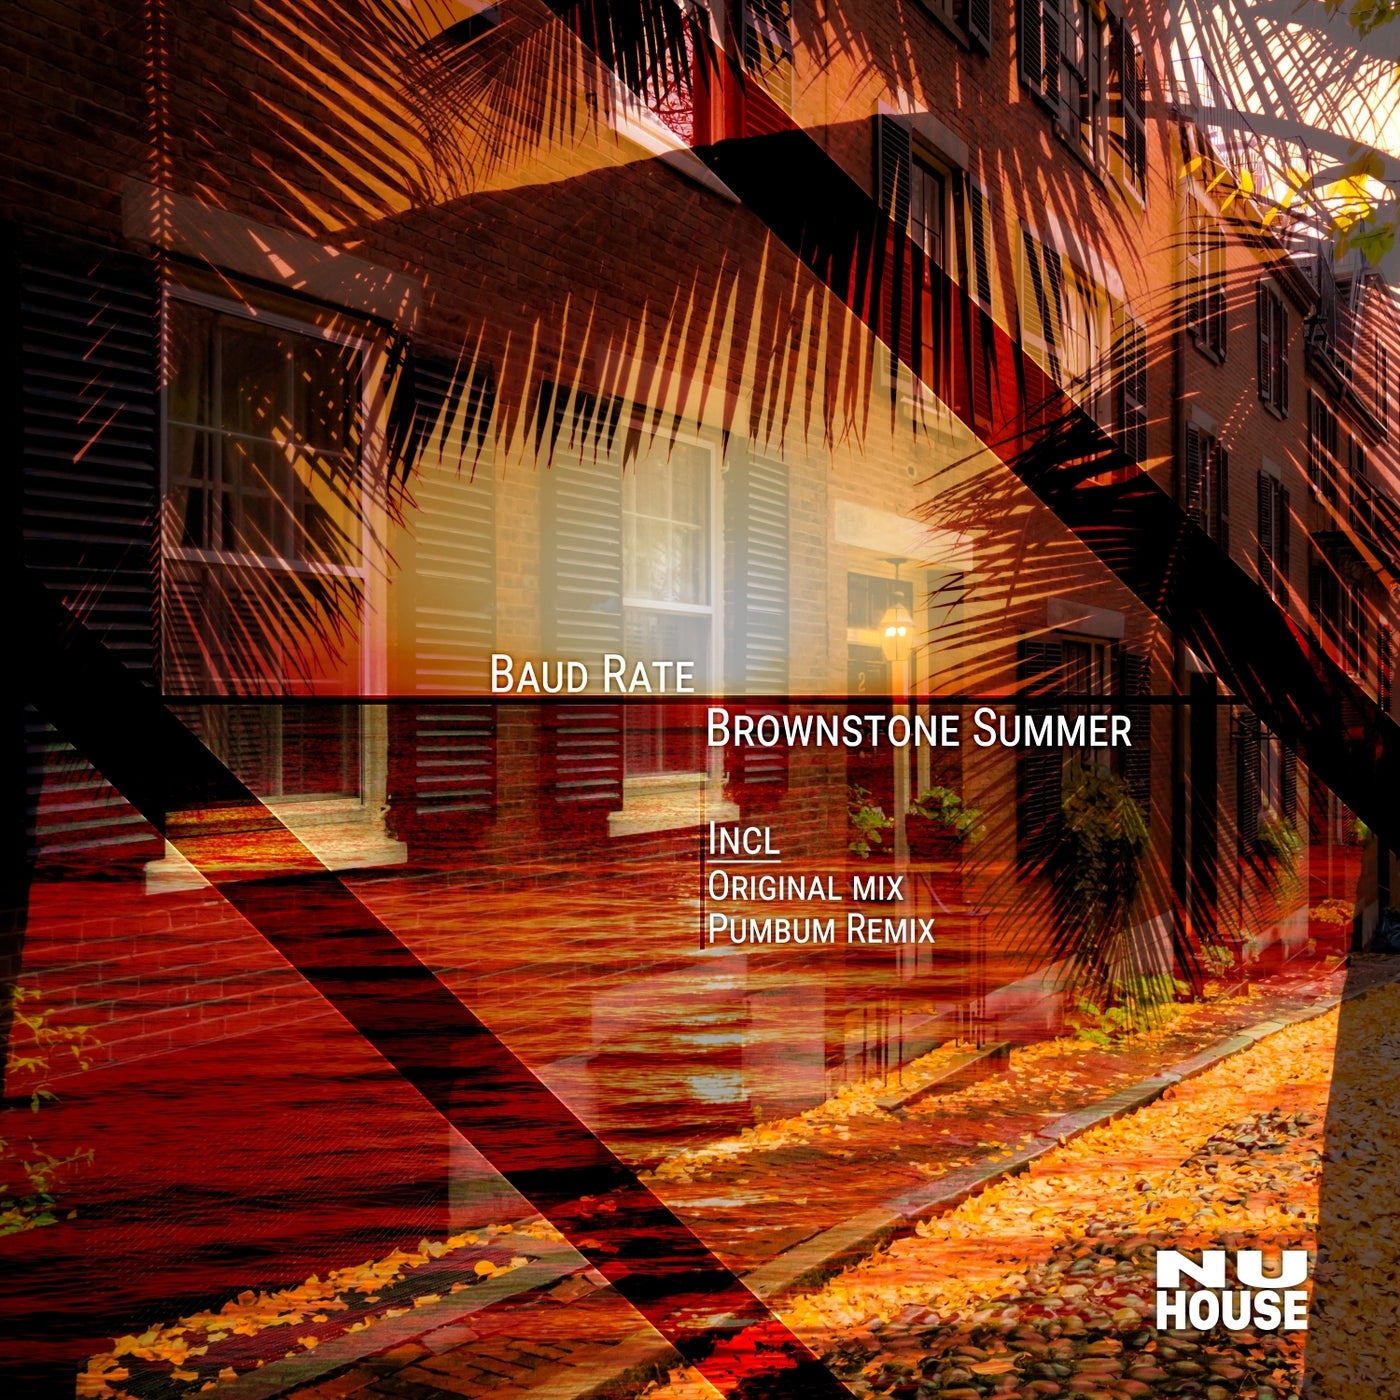 Cover - Baud Rate - Brownstone Summer (pumbum Remix)